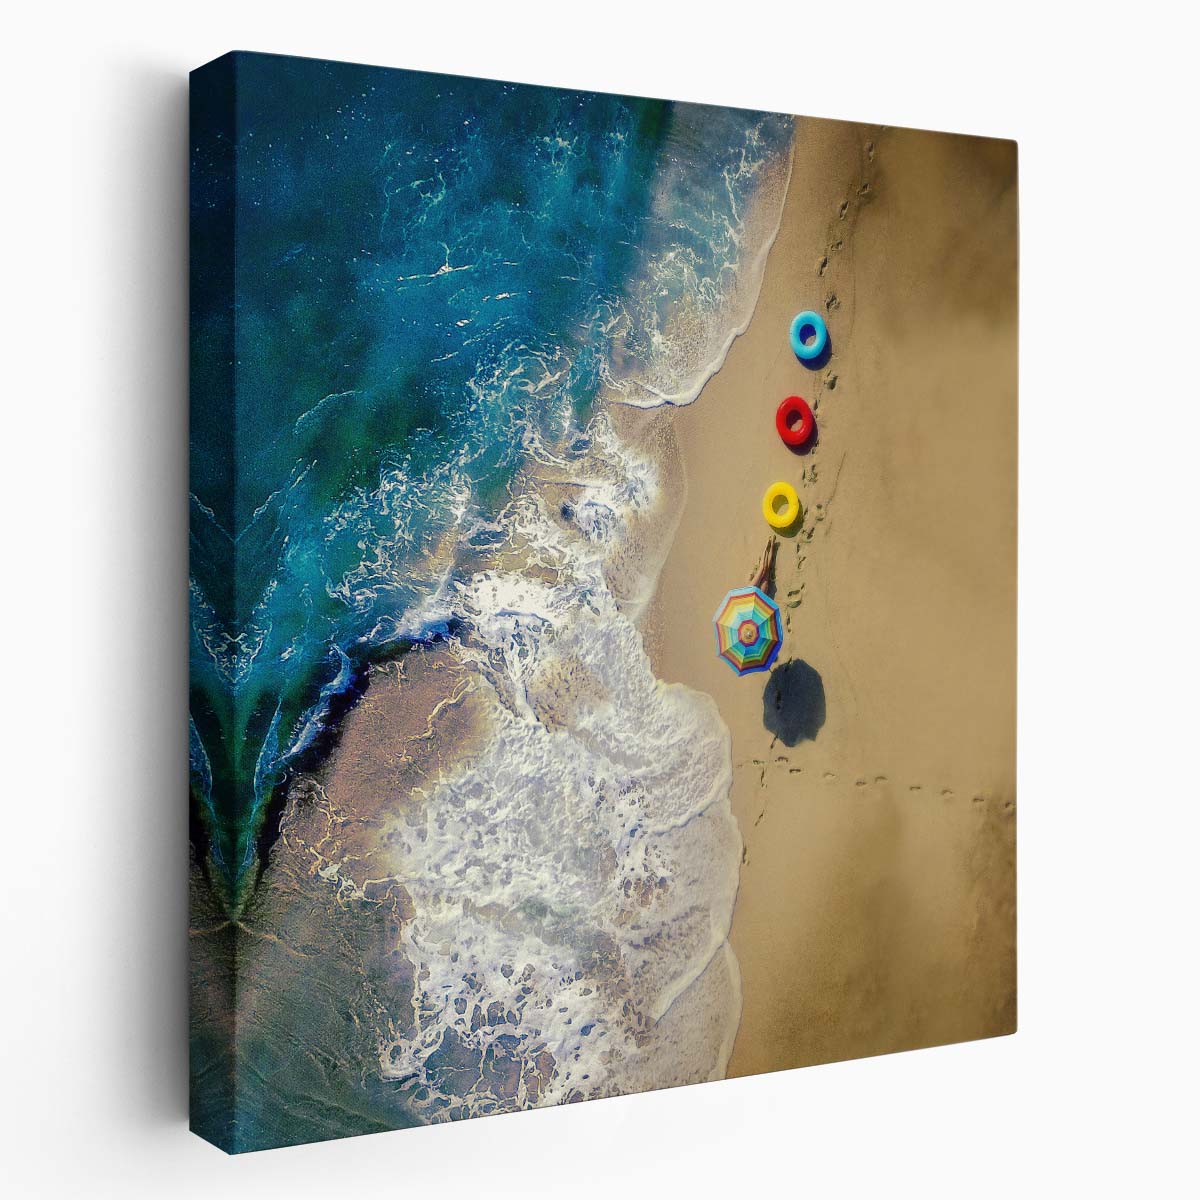 Vibrant Summer Beach Aerial View Wall Art by Luxuriance Designs. Made in USA.